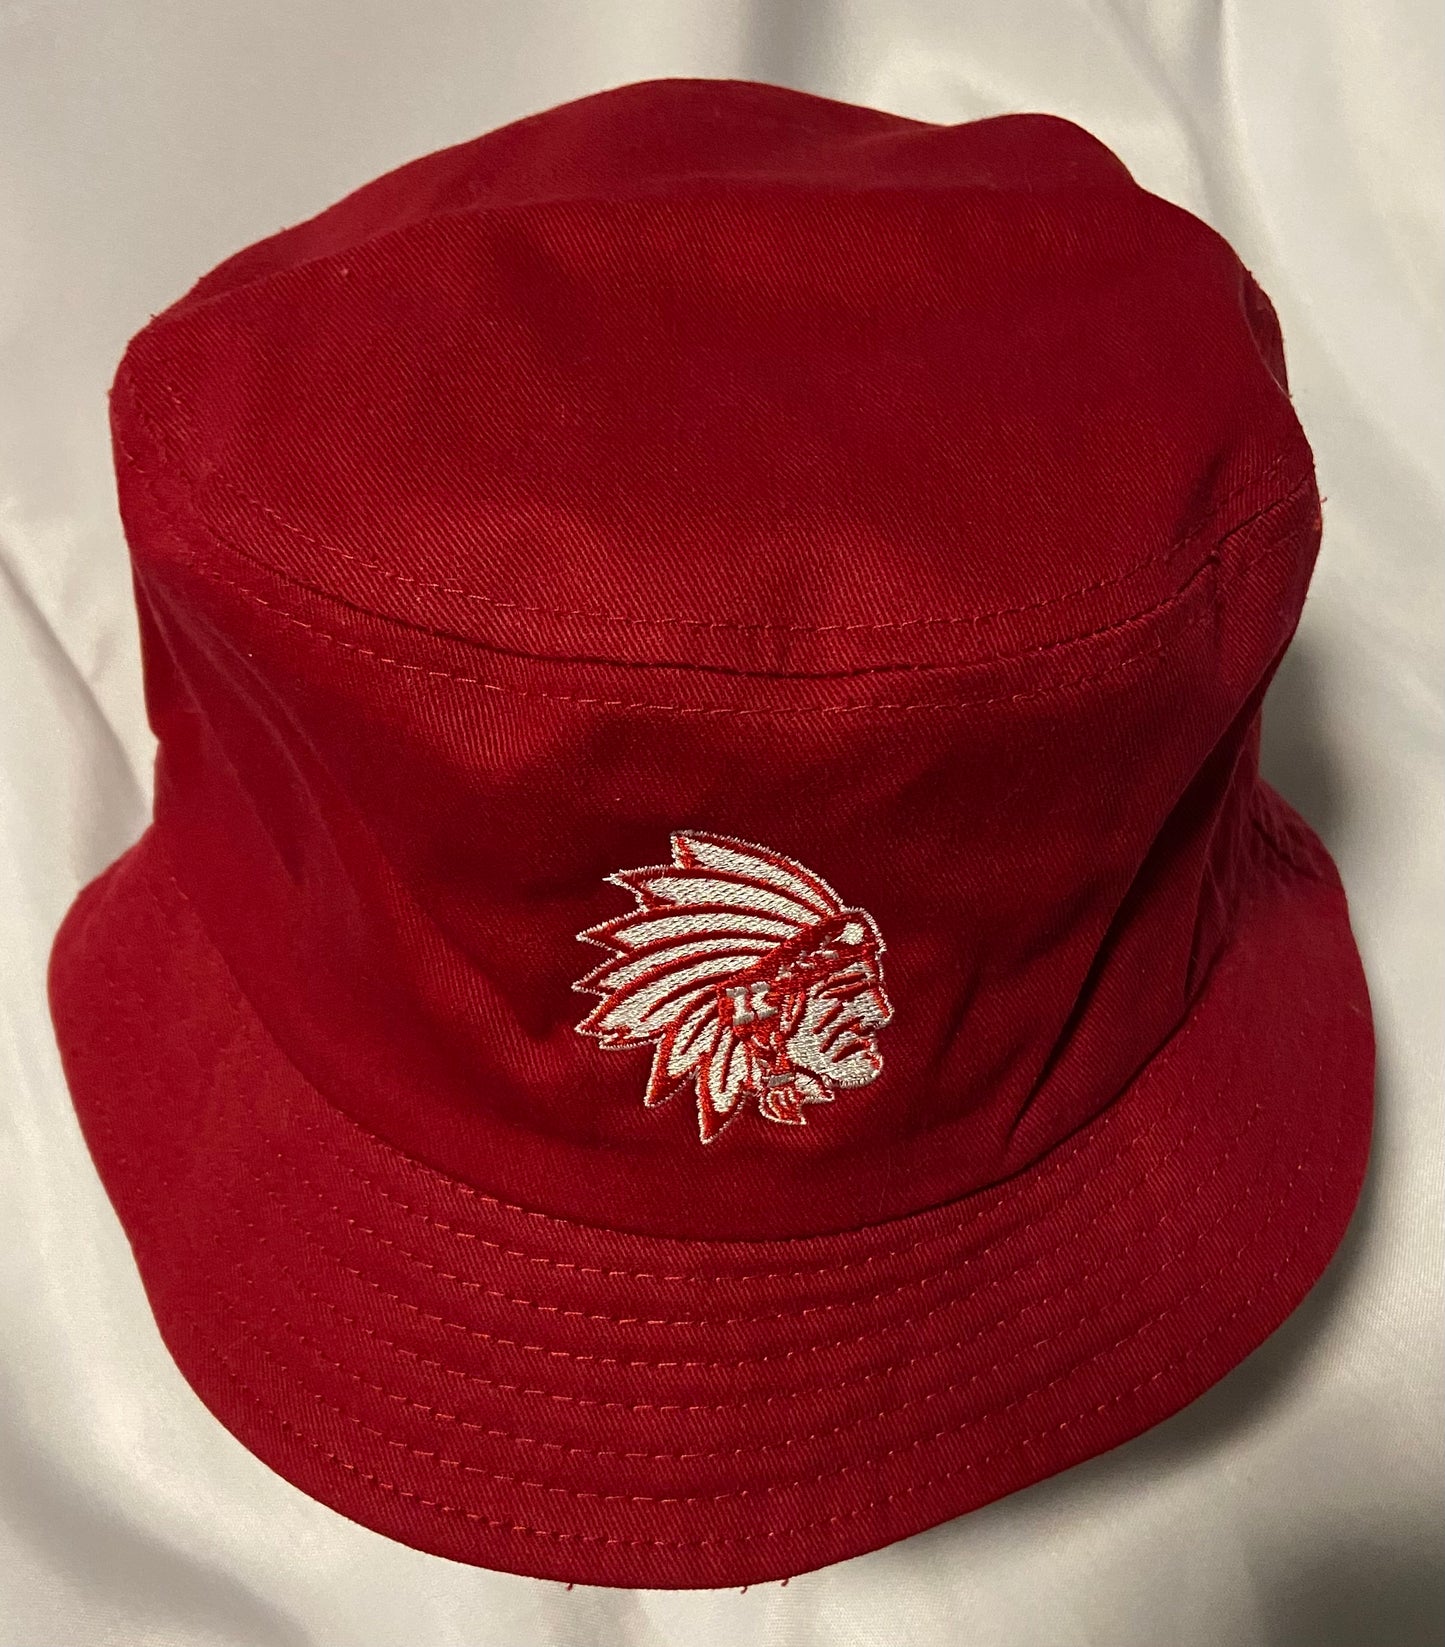 Knox Redskins Embroidered Floppy Hat - Bucket Cap - Red